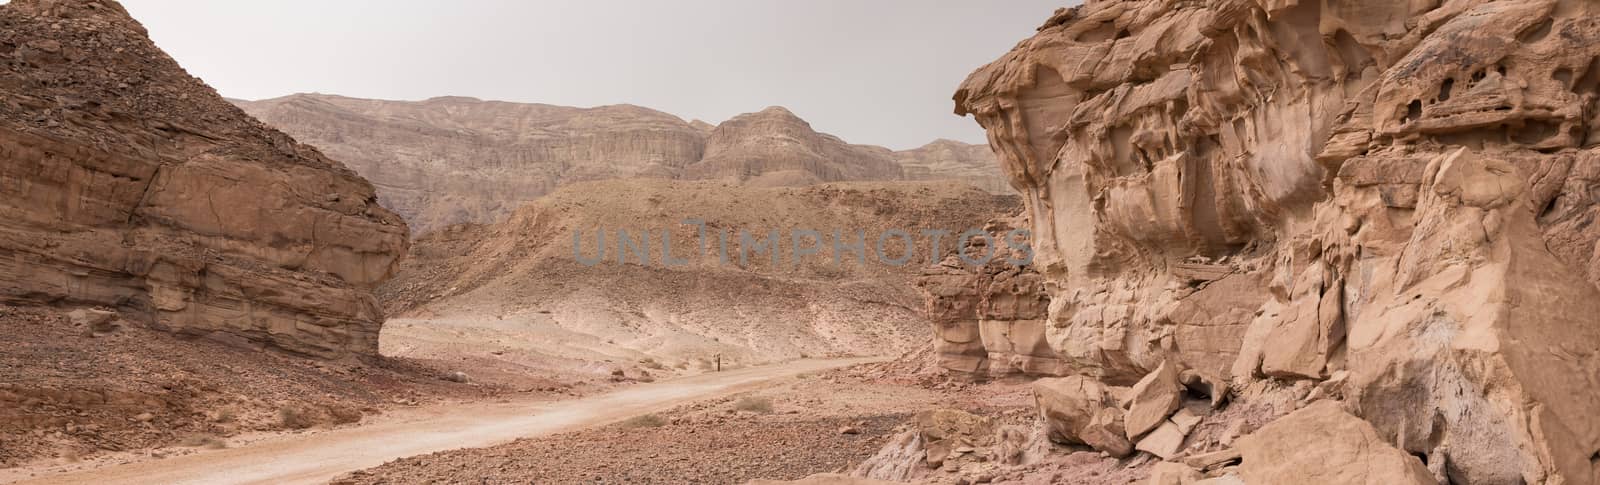 road in timna national park by compuinfoto